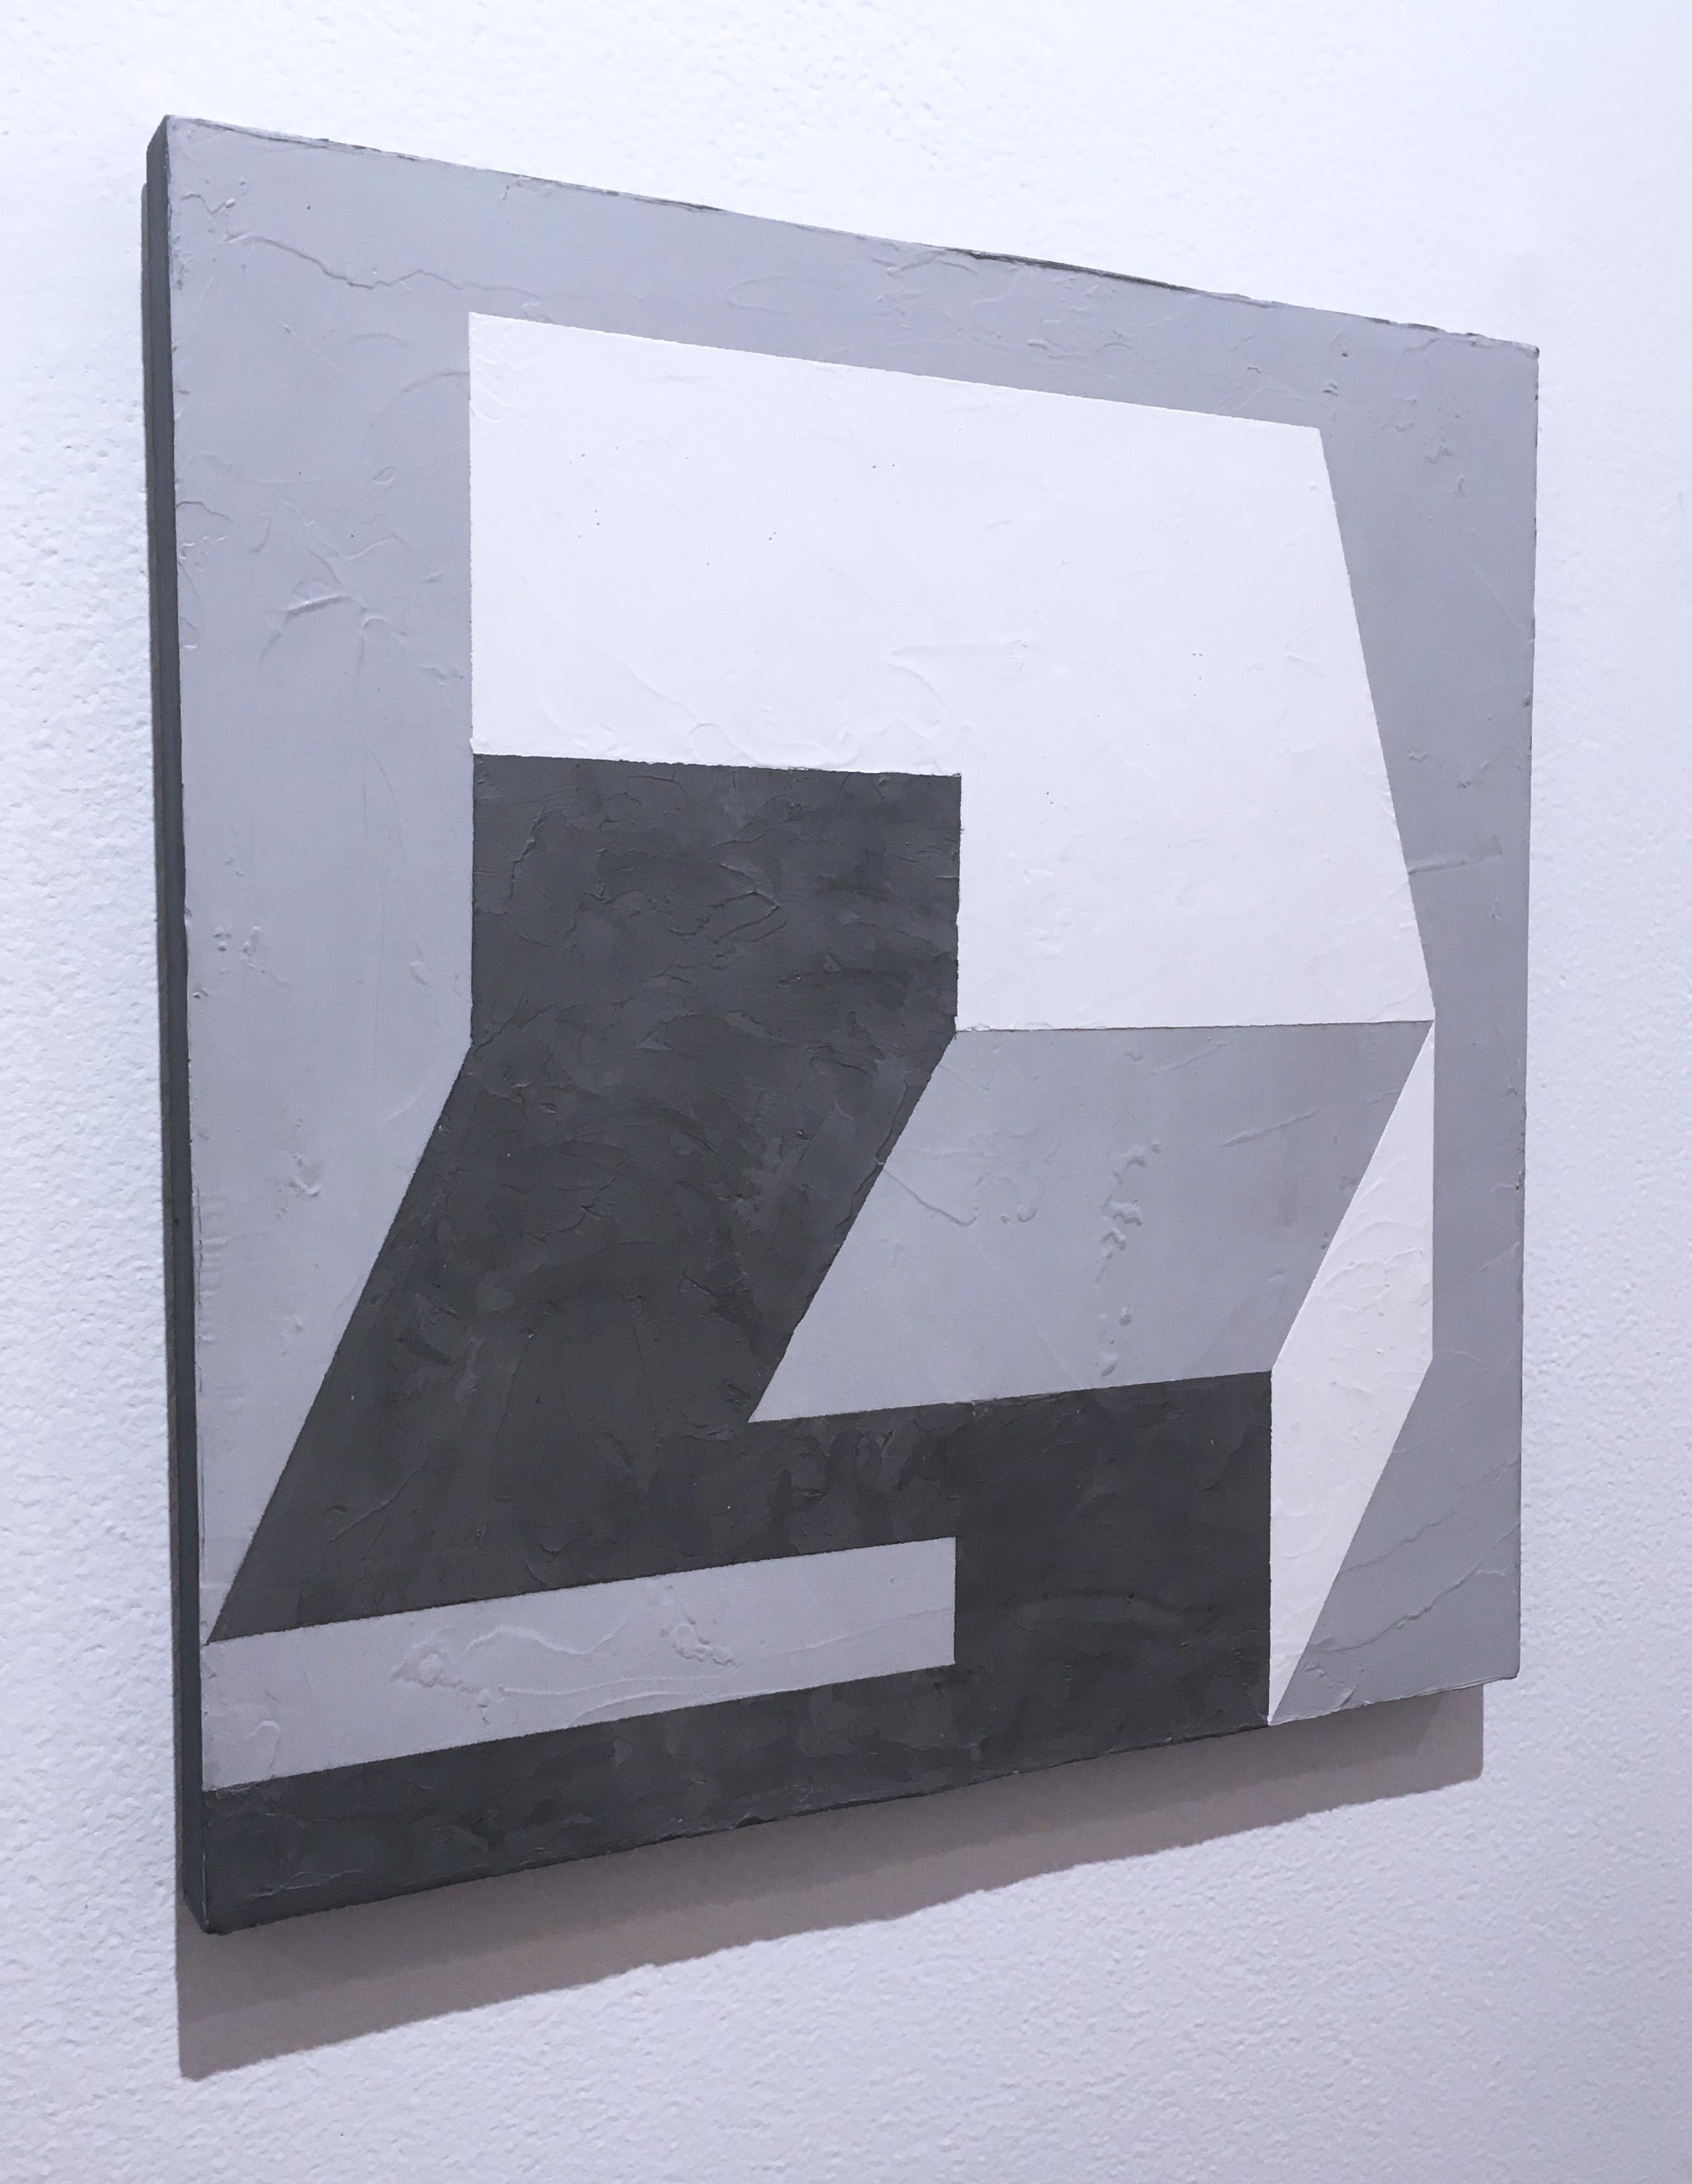 Balancing III, 2019, Abstract geometry, non-objective, plaster, black, white  - Abstract Geometric Mixed Media Art by Kati Vilim